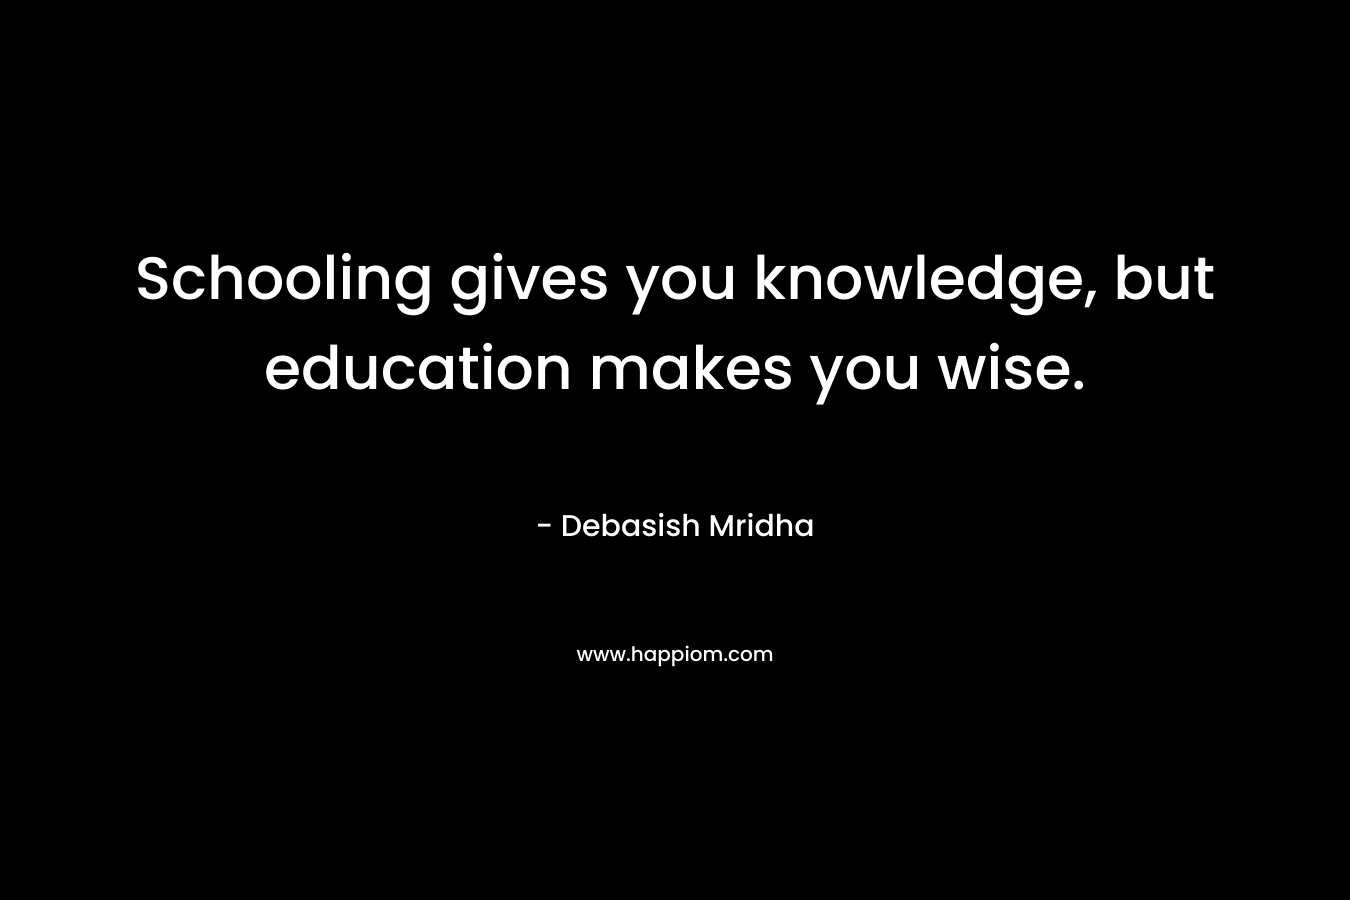 Schooling gives you knowledge, but education makes you wise.